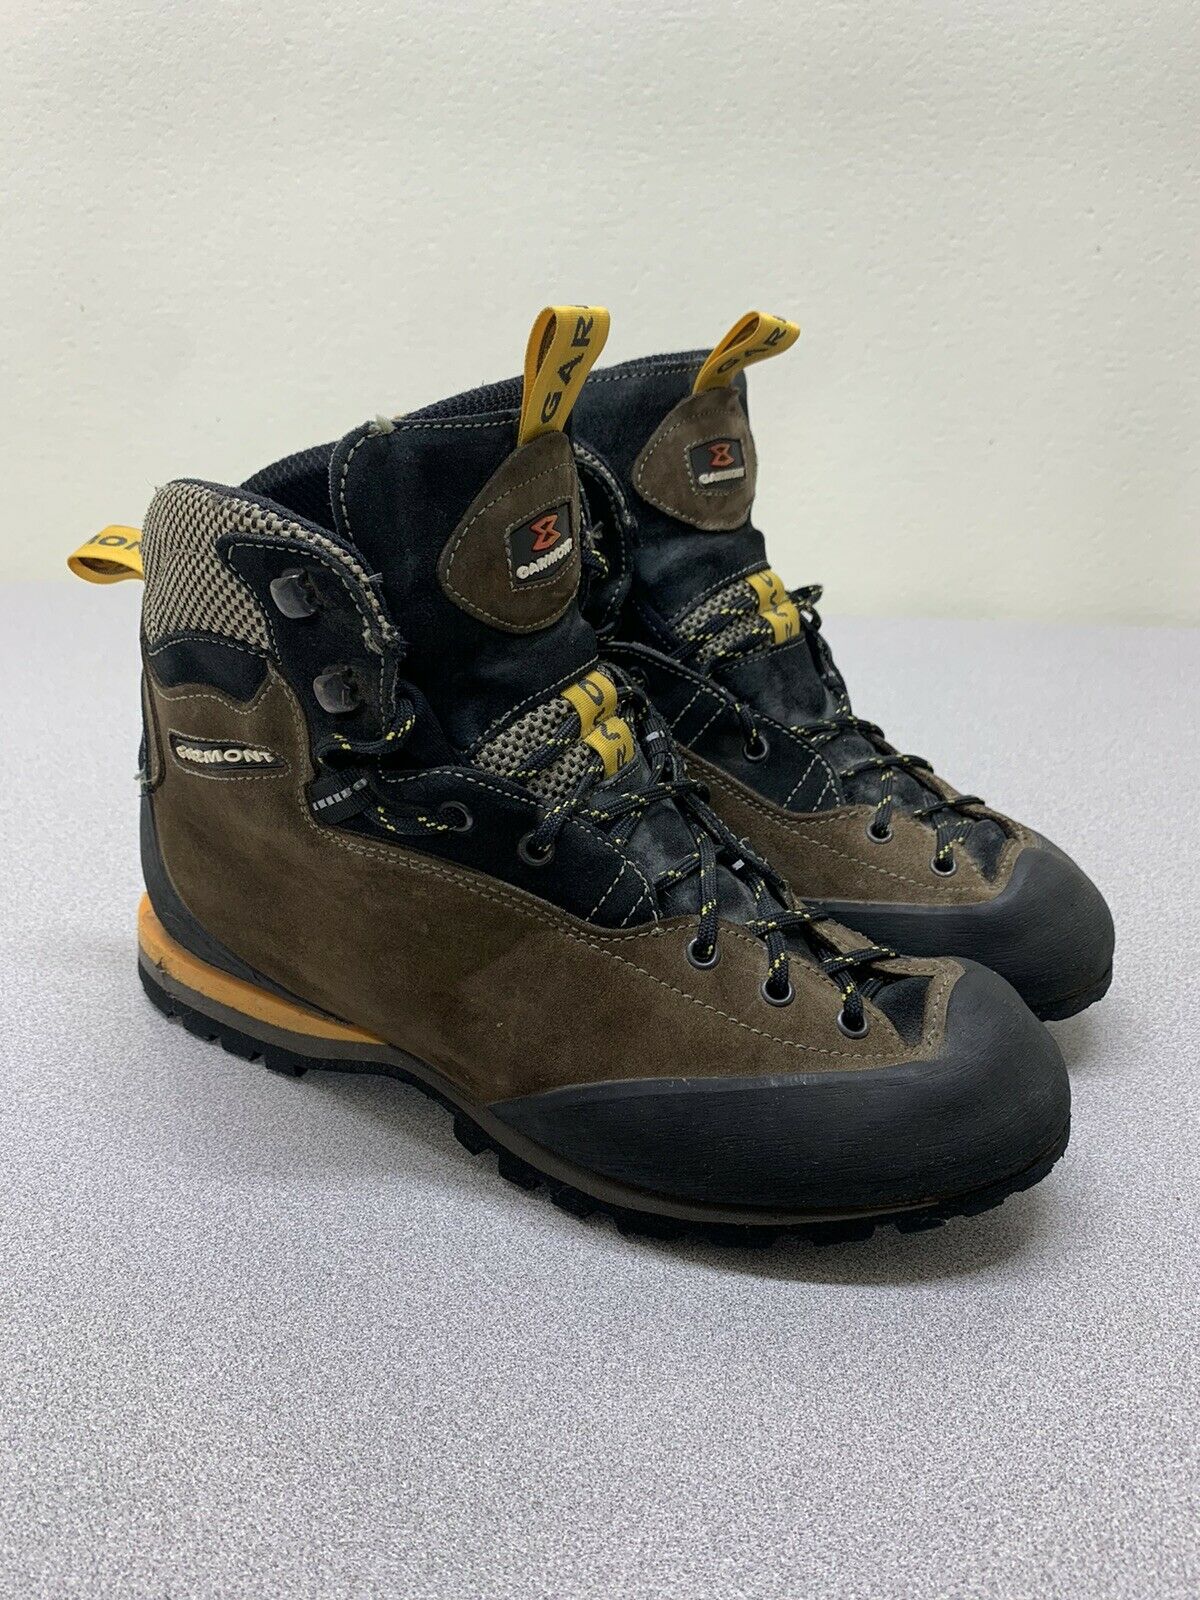 Garmont Hiking Boots Mountaineering Men’s Size 10 Vibram Made In Italy Nice Euc